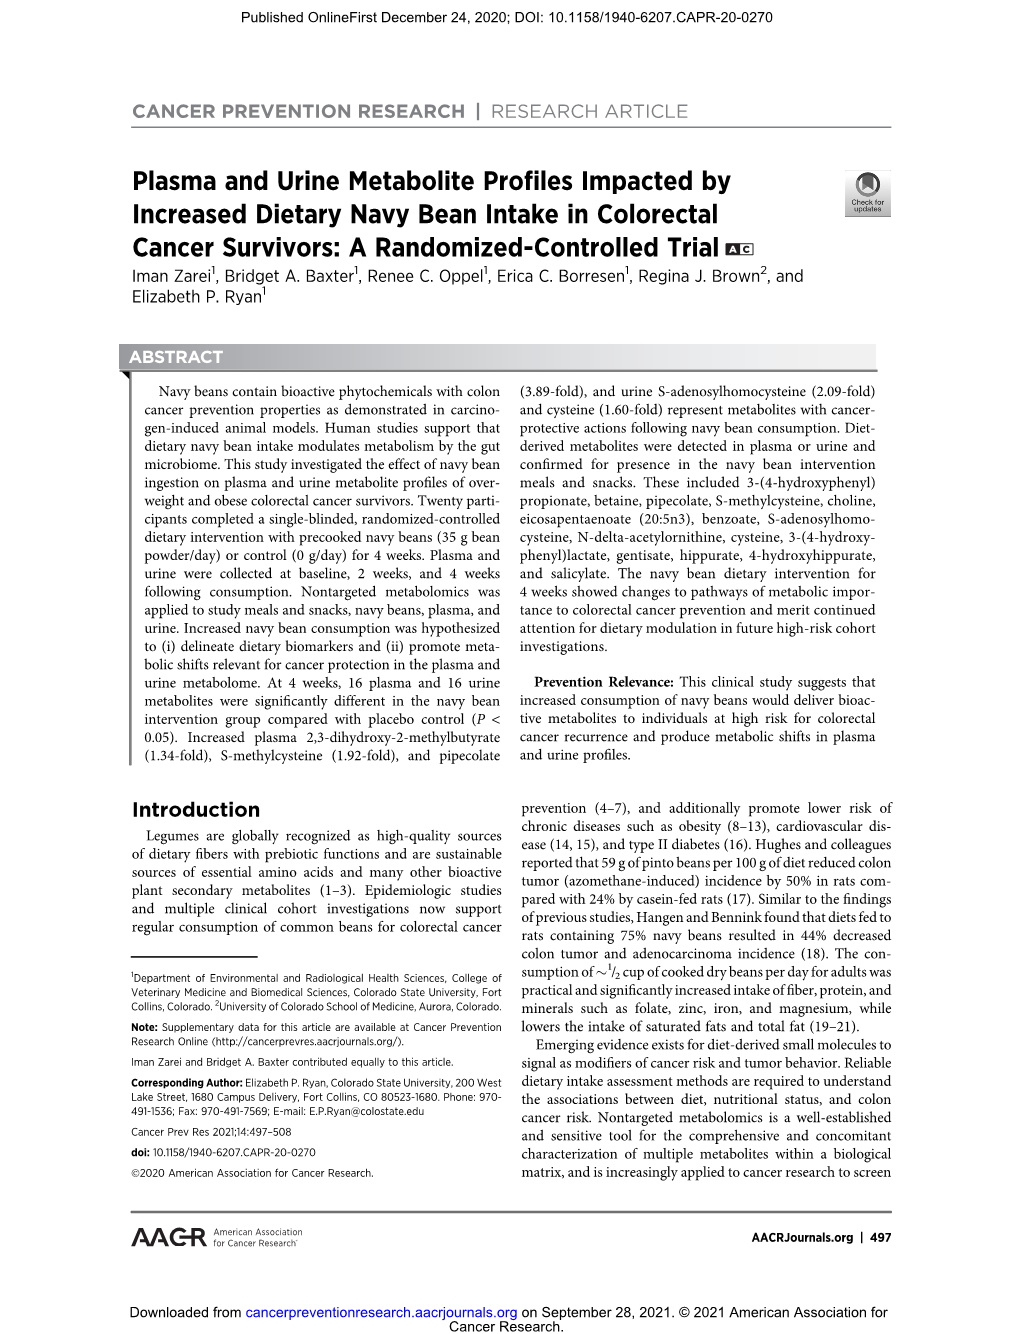 Plasma and Urine Metabolite Profiles Impacted by Increased Dietary Navy Bean Intake in Colorectal Cancer Survivors: a Randomized-Controlled Trial